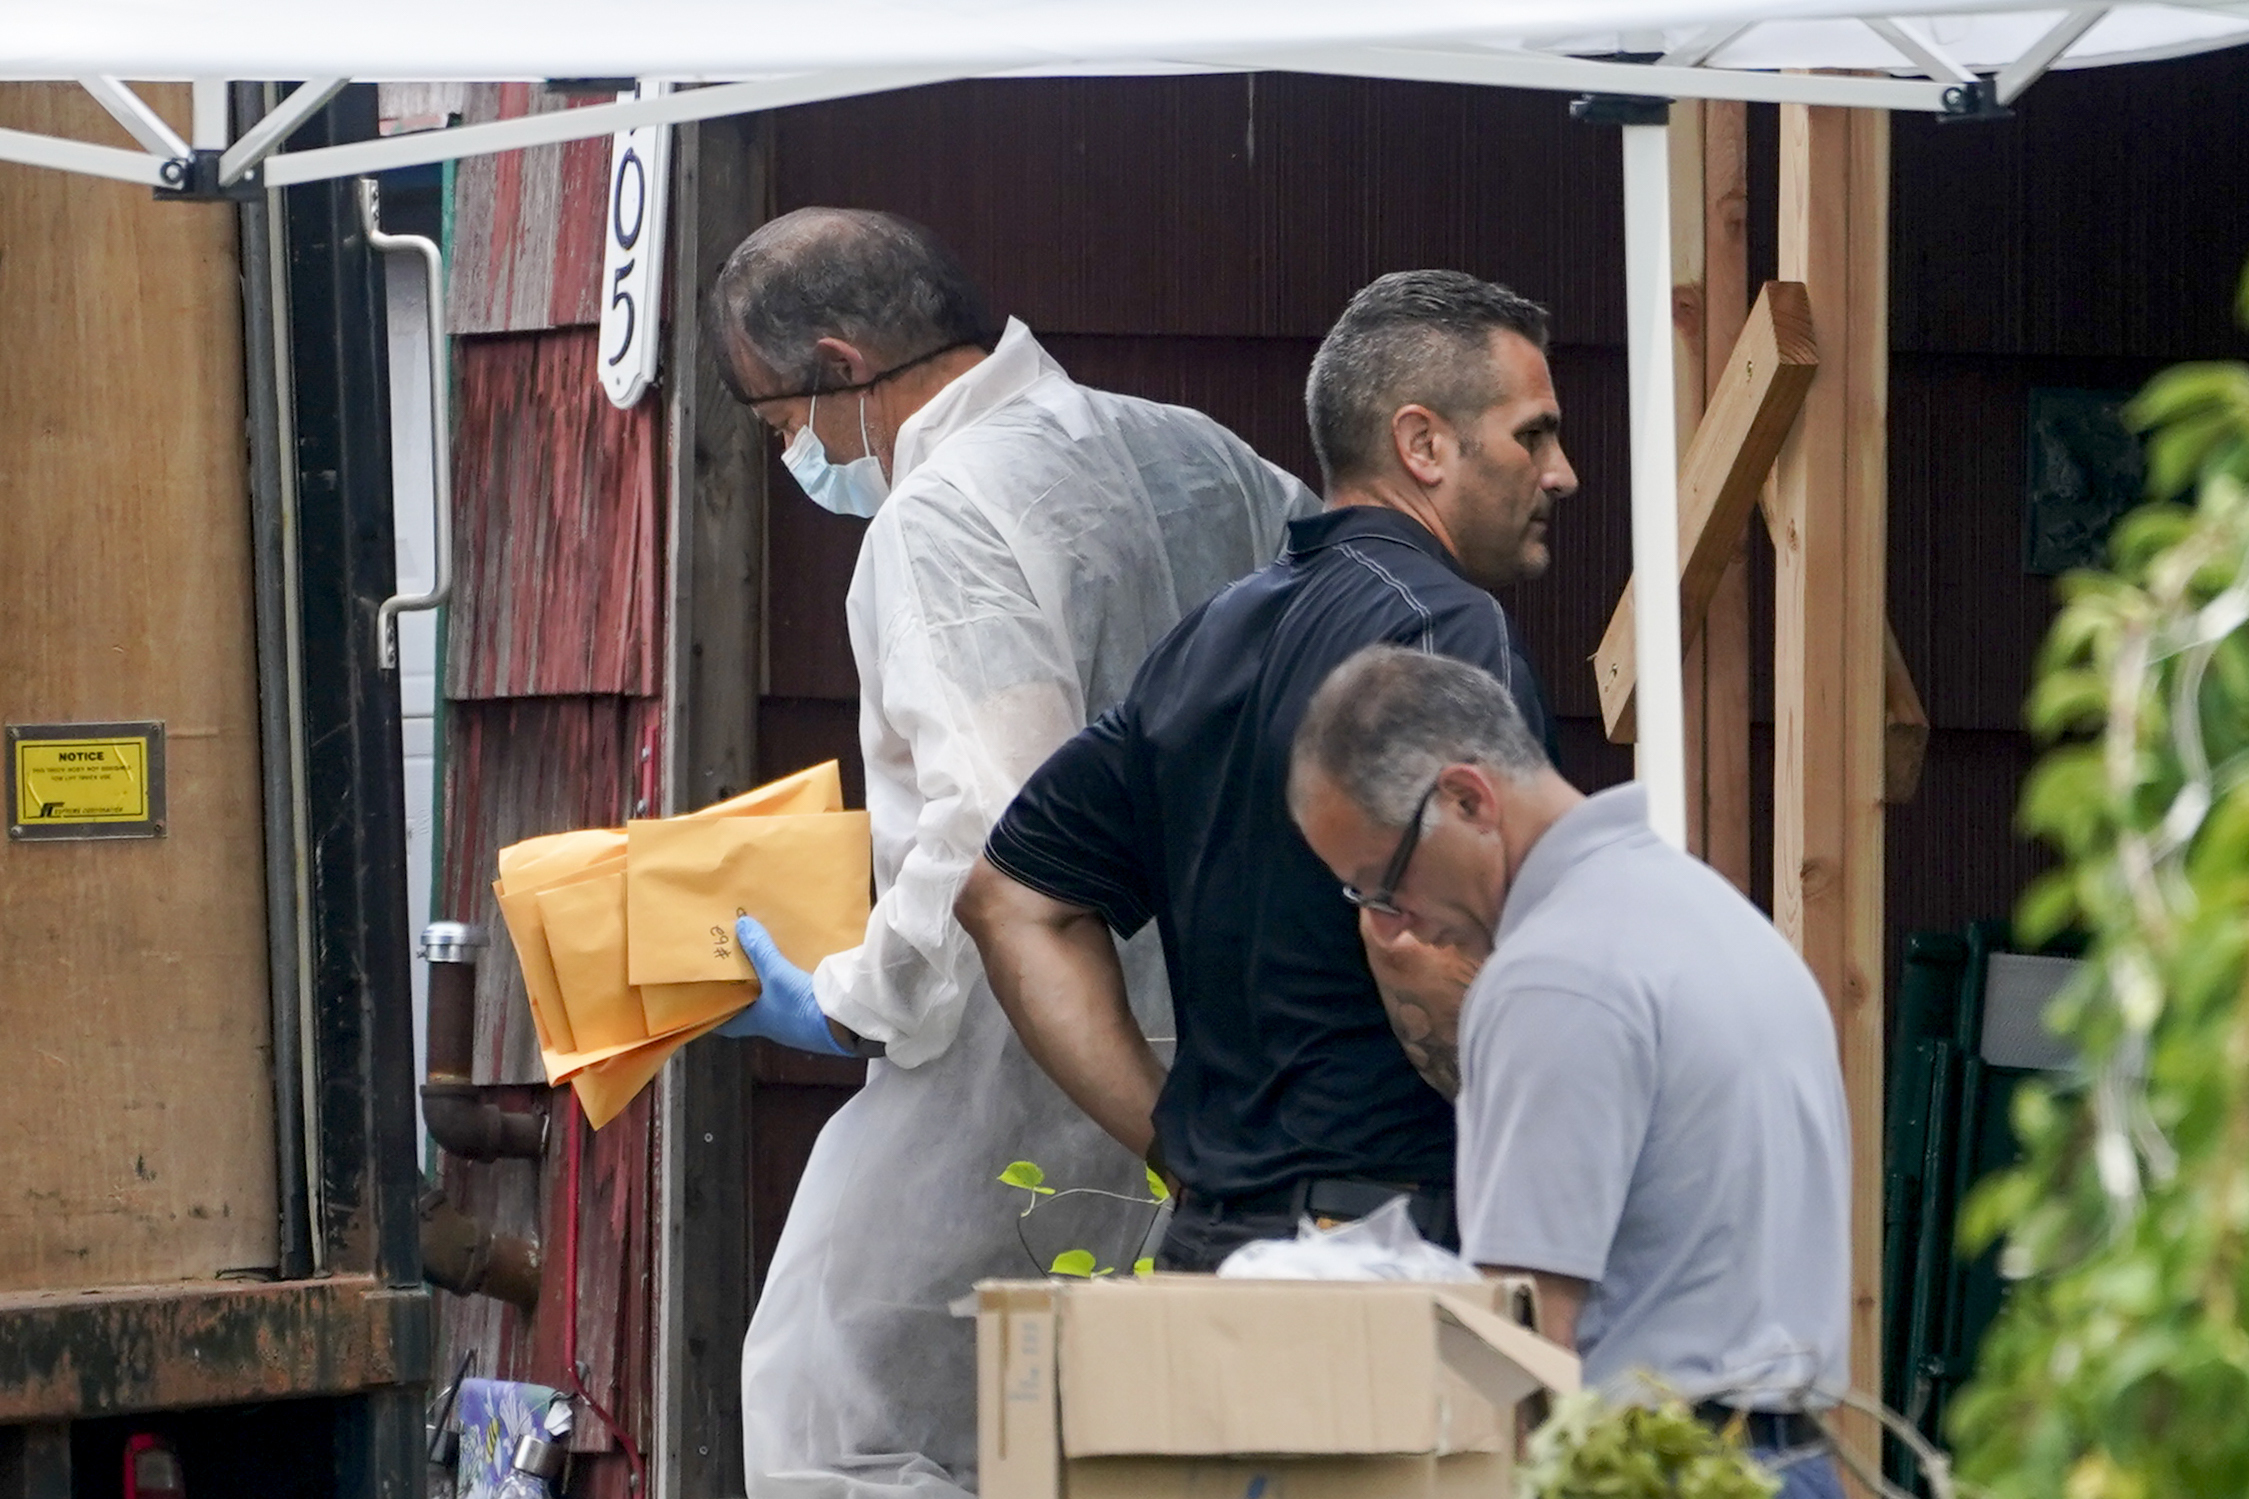 PHOTO: Authorities remove evidence as they search the home of suspect Rex Heuermann, Tuesday, July 18, 2023, in Massapequa Park, N.Y.